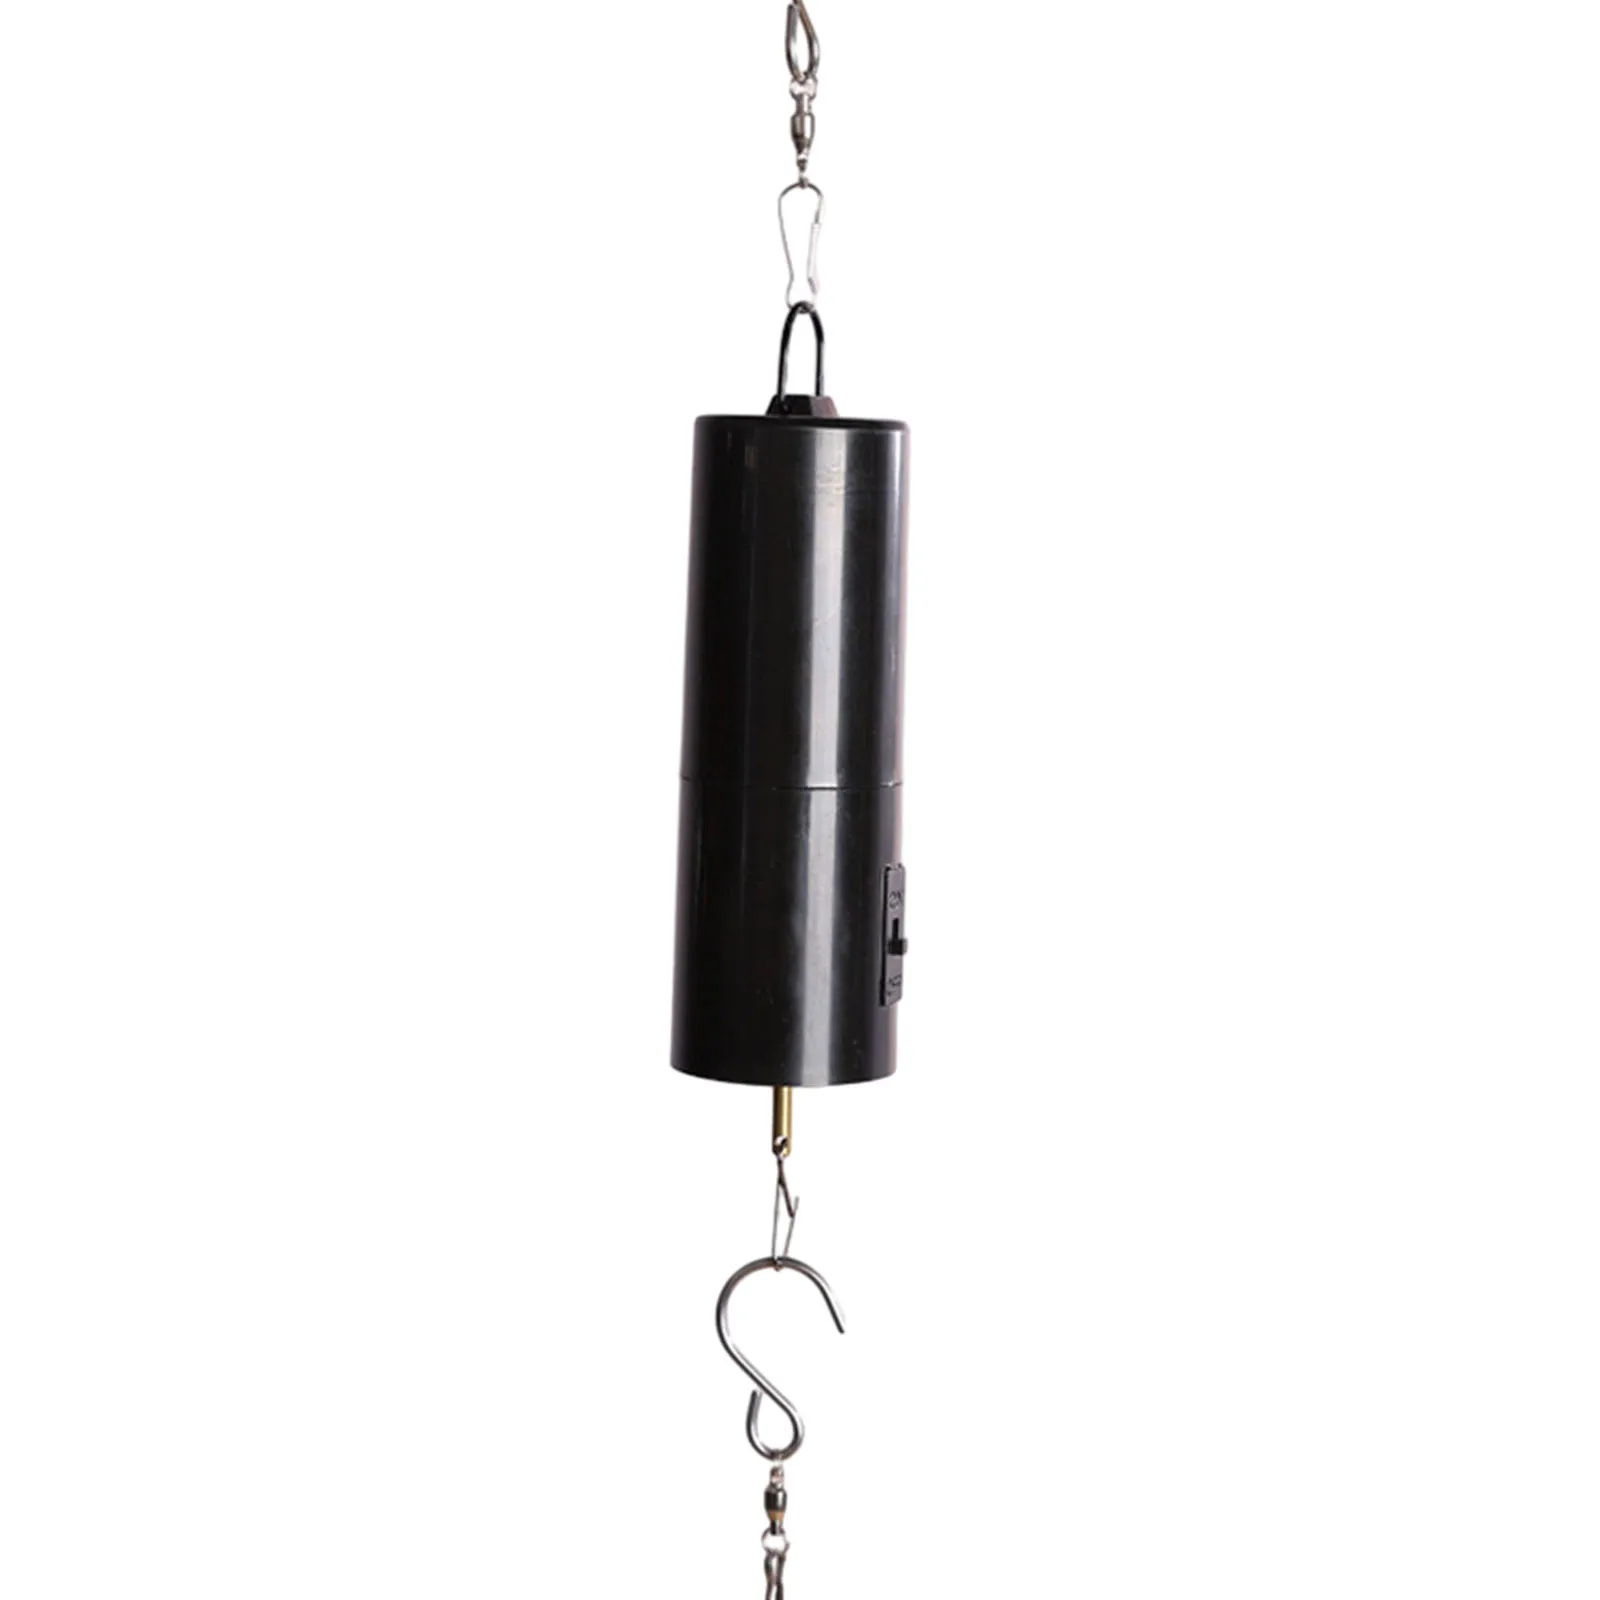 

Reliable Rotating Motor for Hanging Decorations Optimized for Wind Chimes Spinners Sturdy Materials Battery Powered